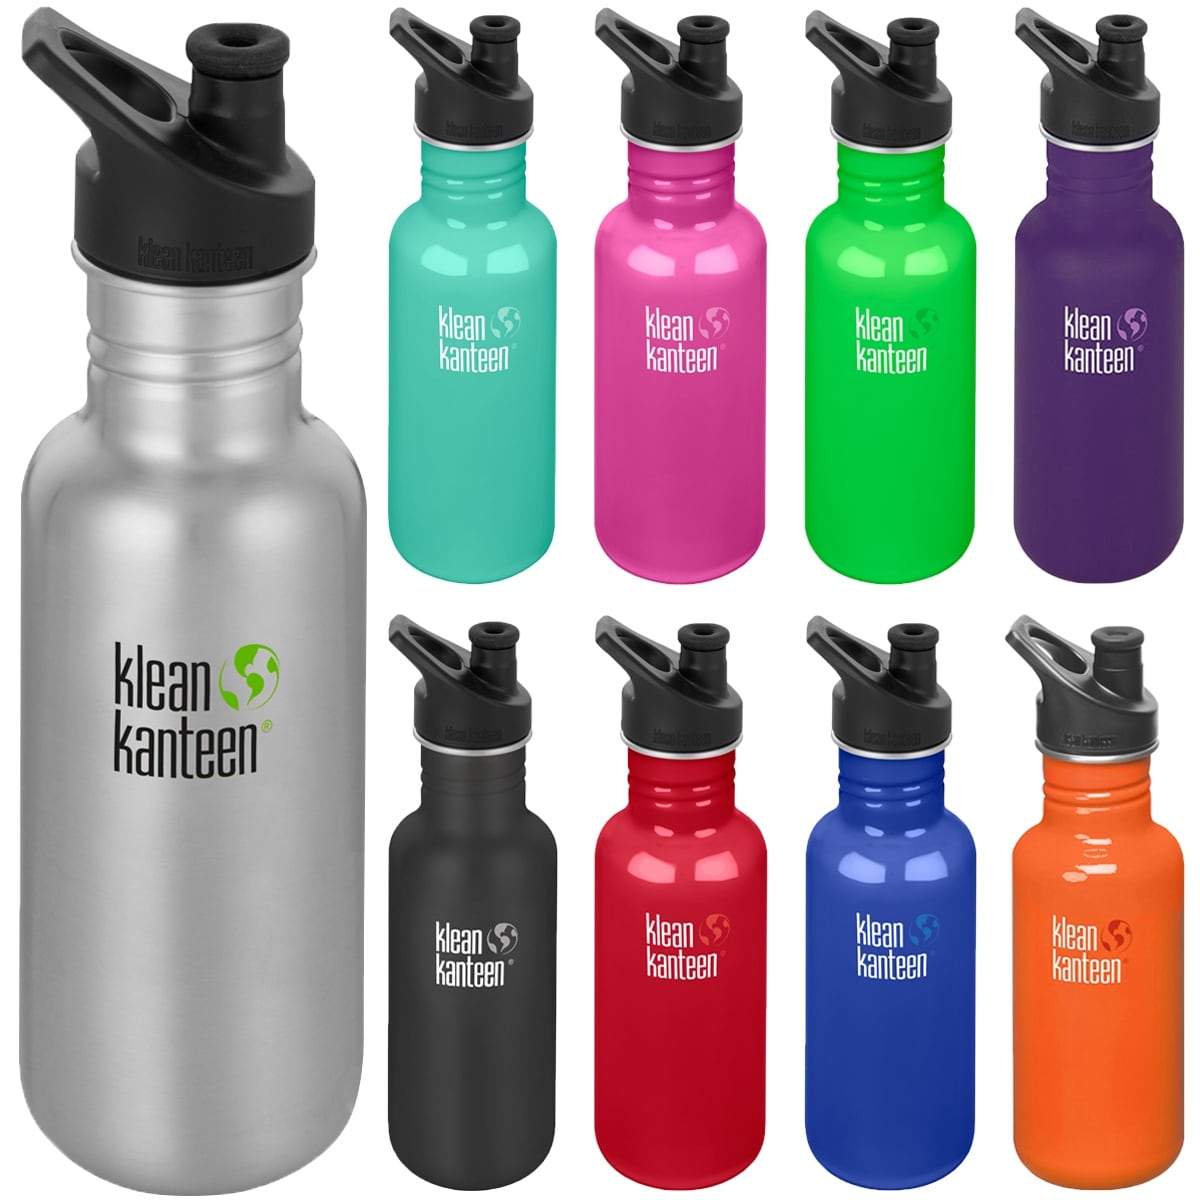 Shop For Klean Kanteen Classic 18 Oz Single Wall Bottle With 3 0 Sport Cap Get Free Delivery On Everything At Overstock Your Online Kitchen Dining Store Get 5 In Rewards With Club O